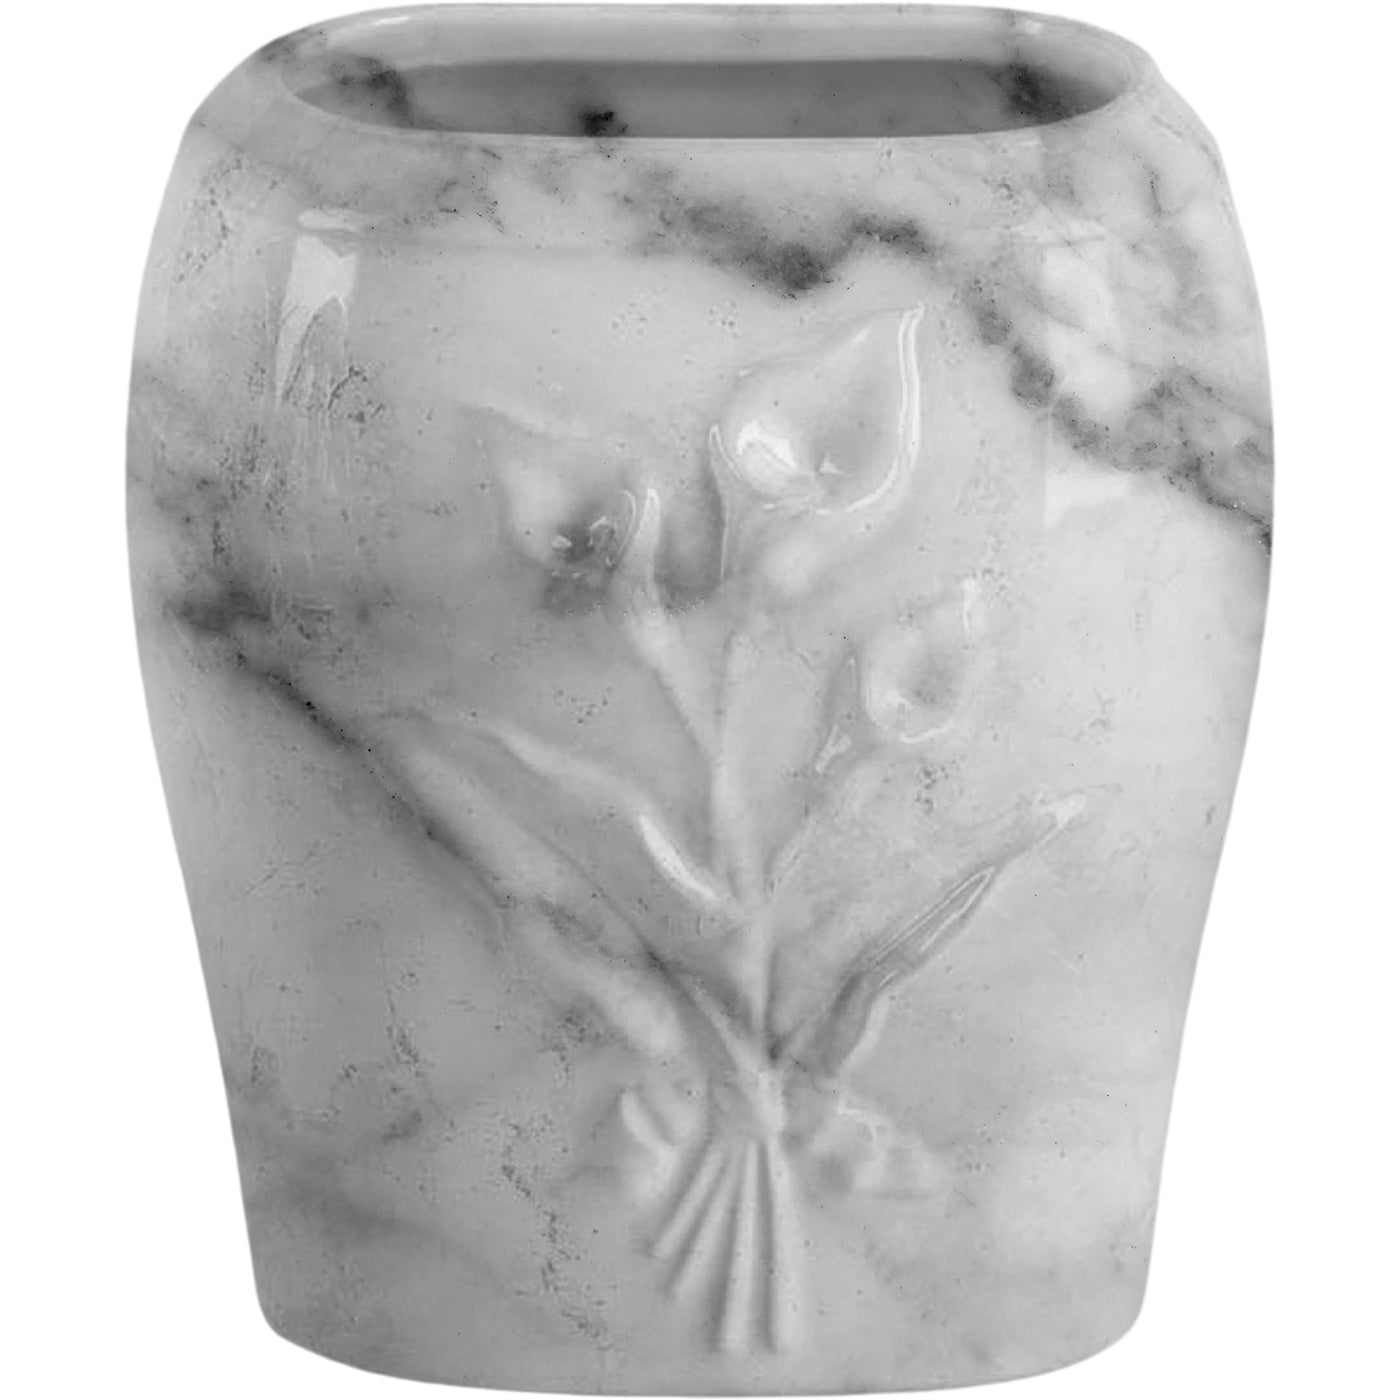 Rectangular grave vase Calla carrara 19x17cm - 7.5x6.7in In white porcelain with carrara decoration, ground attached CAL160T/CARR